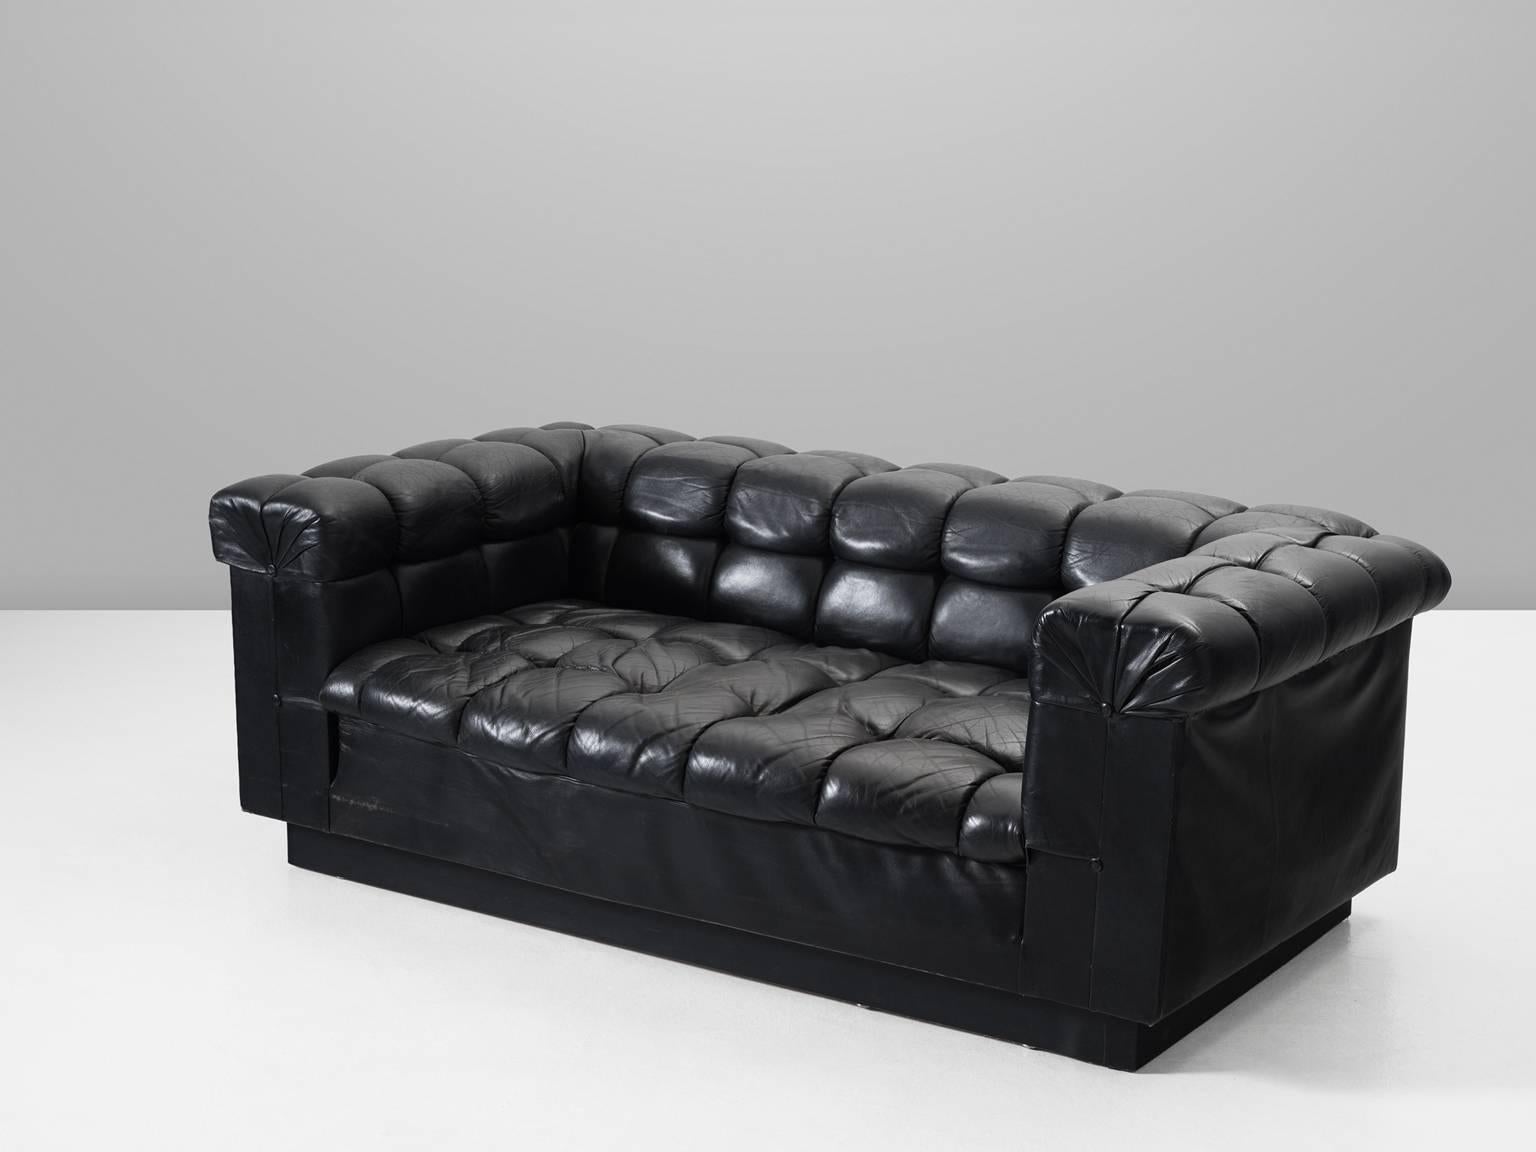 Mid-Century Modern Edward Wormley Tufted Two-Seat Sofa in Black Leather for Dunbar